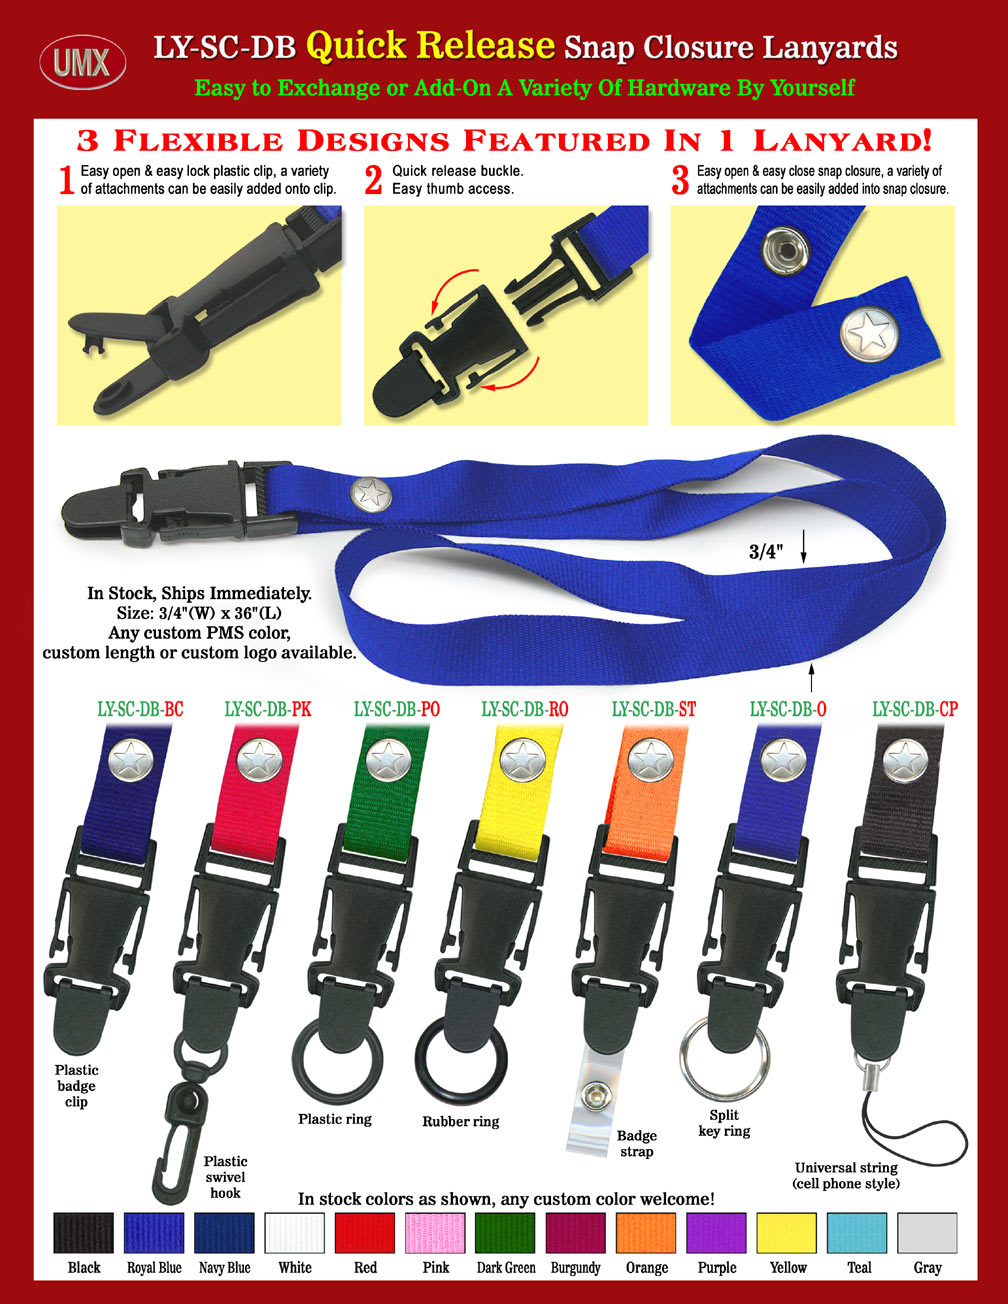 Ship It Now! 3/4" Quick Release Snap-On Lanyards - 3/4"  Detachable & Quick Release Snap-On Lanyards For Same Day Shipping With 13-Colors In Stock.